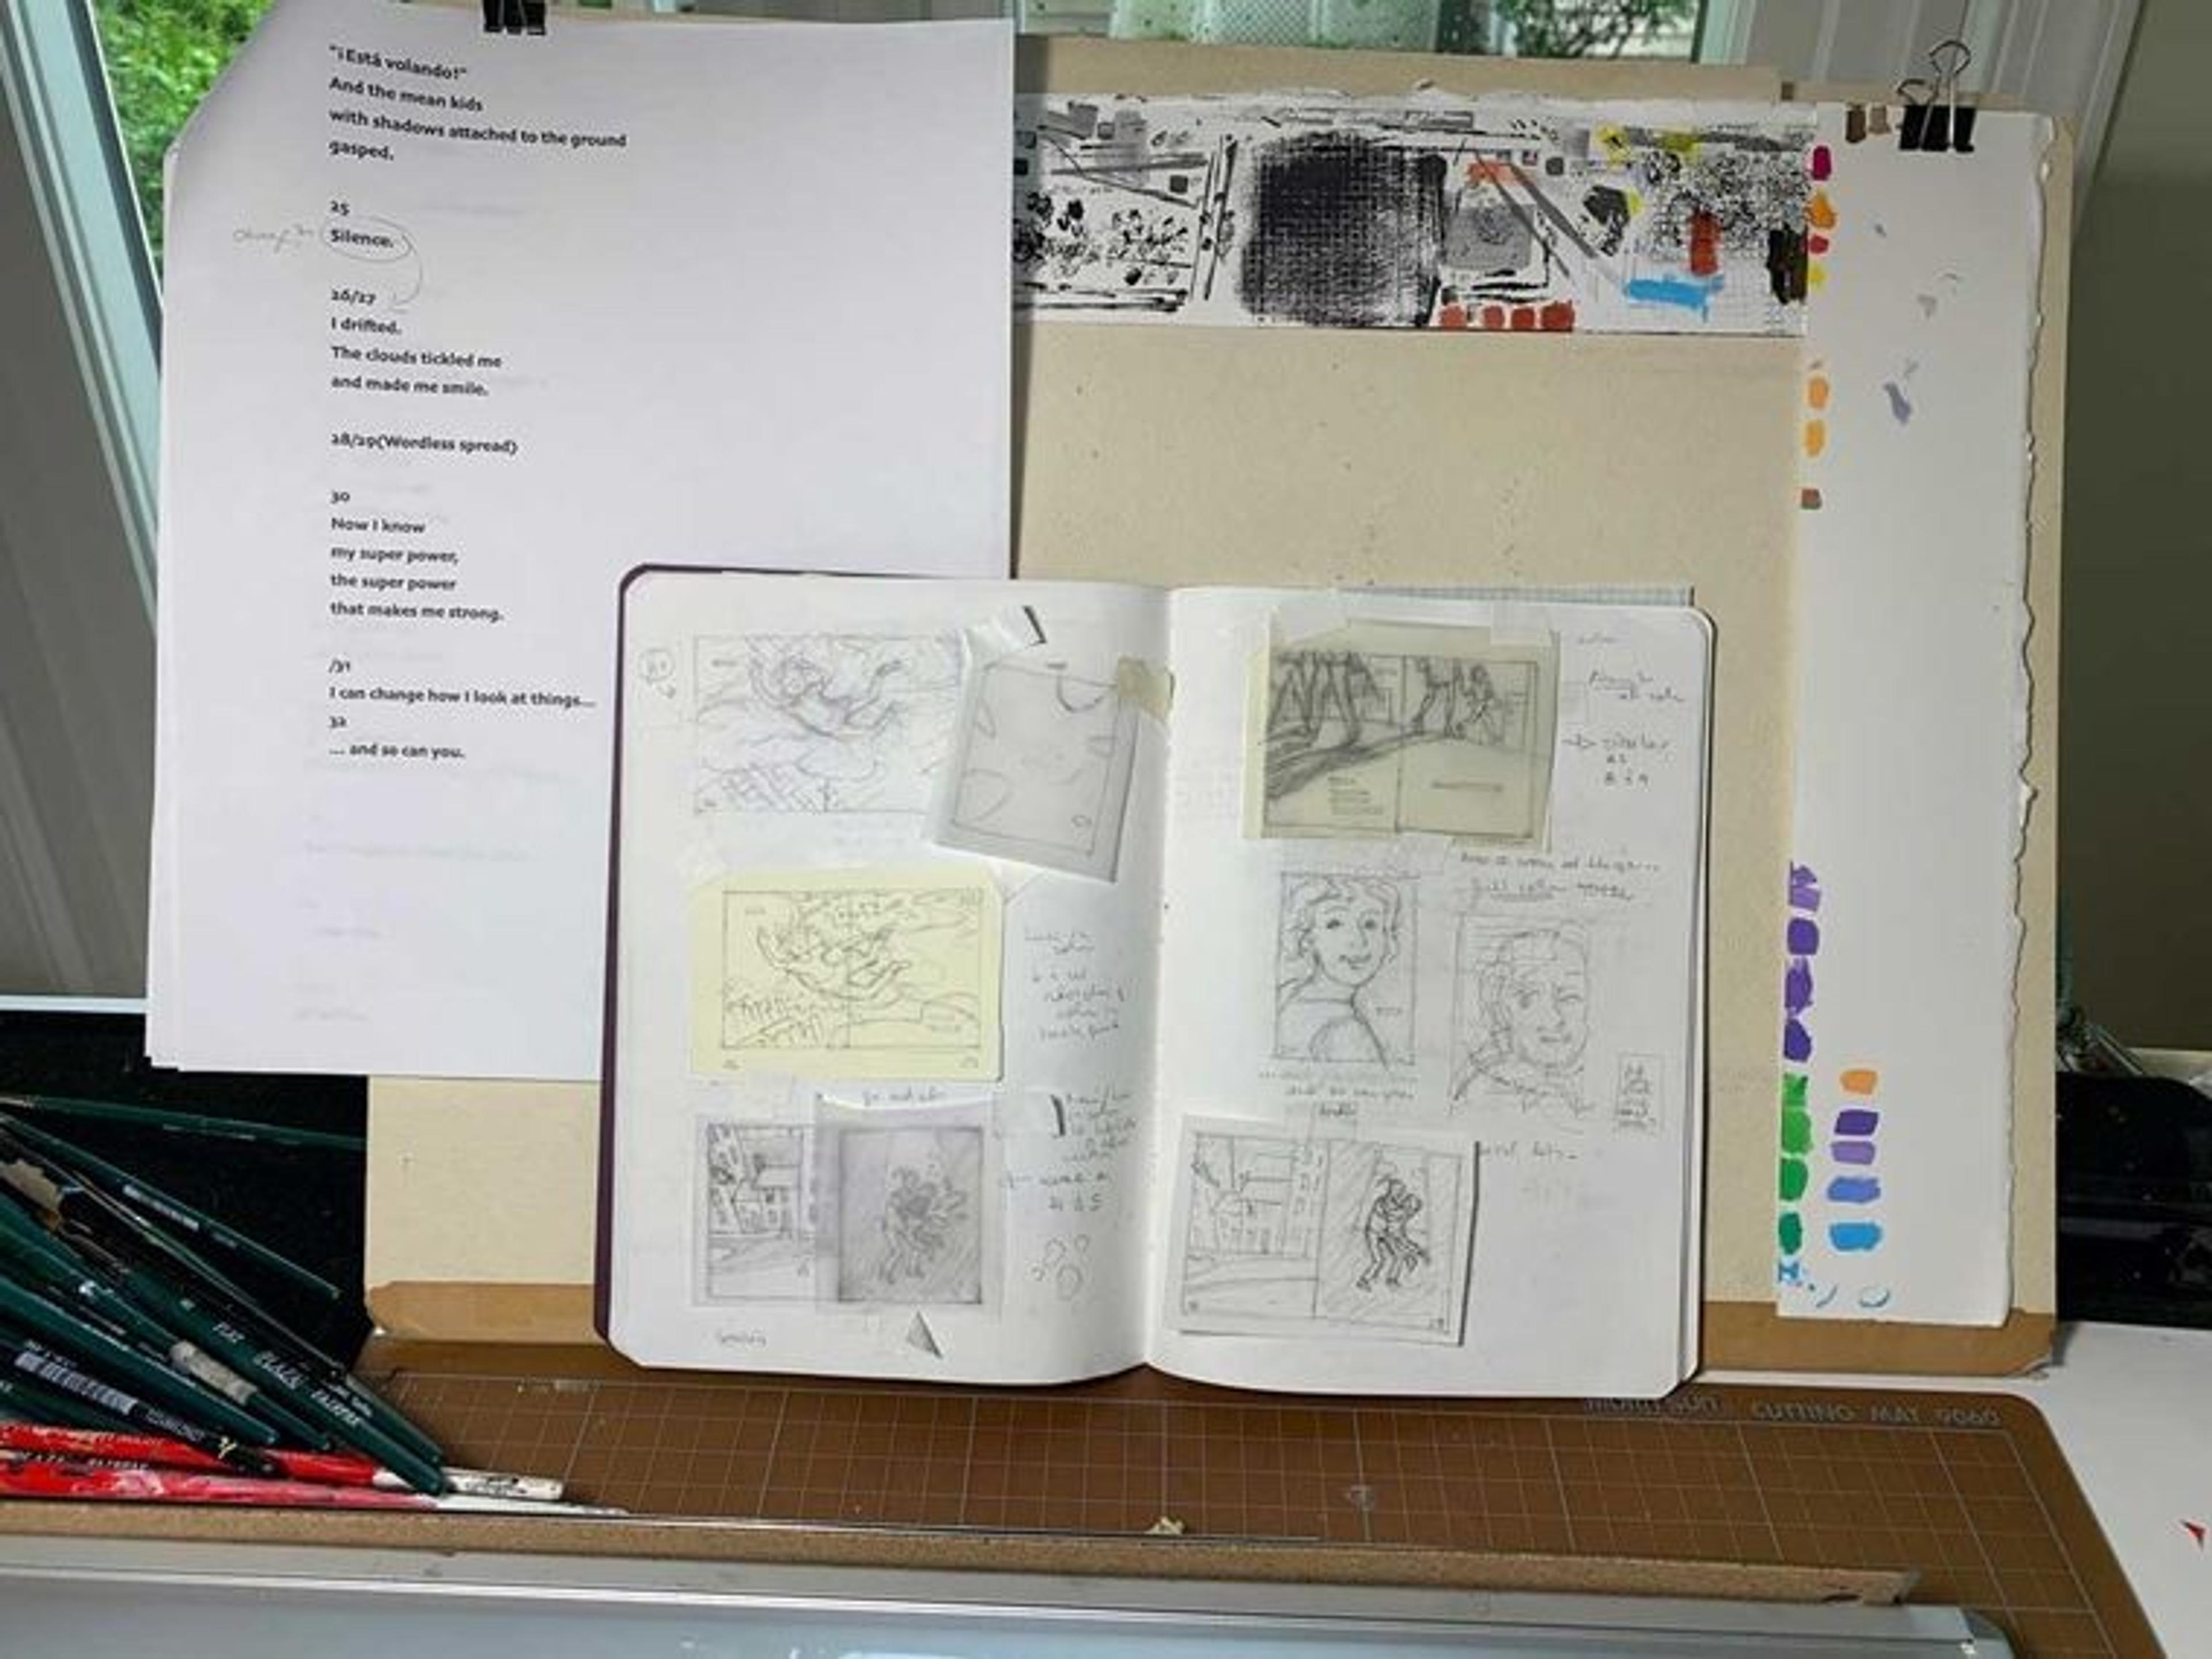 An open sketchbook sits on top of an artist's workbench. Small drawings of illustrations from the book Luci Soars are drawn in pencil on the open pages. under the notebook is a printout of text that will later accompany the illustrations in the book.